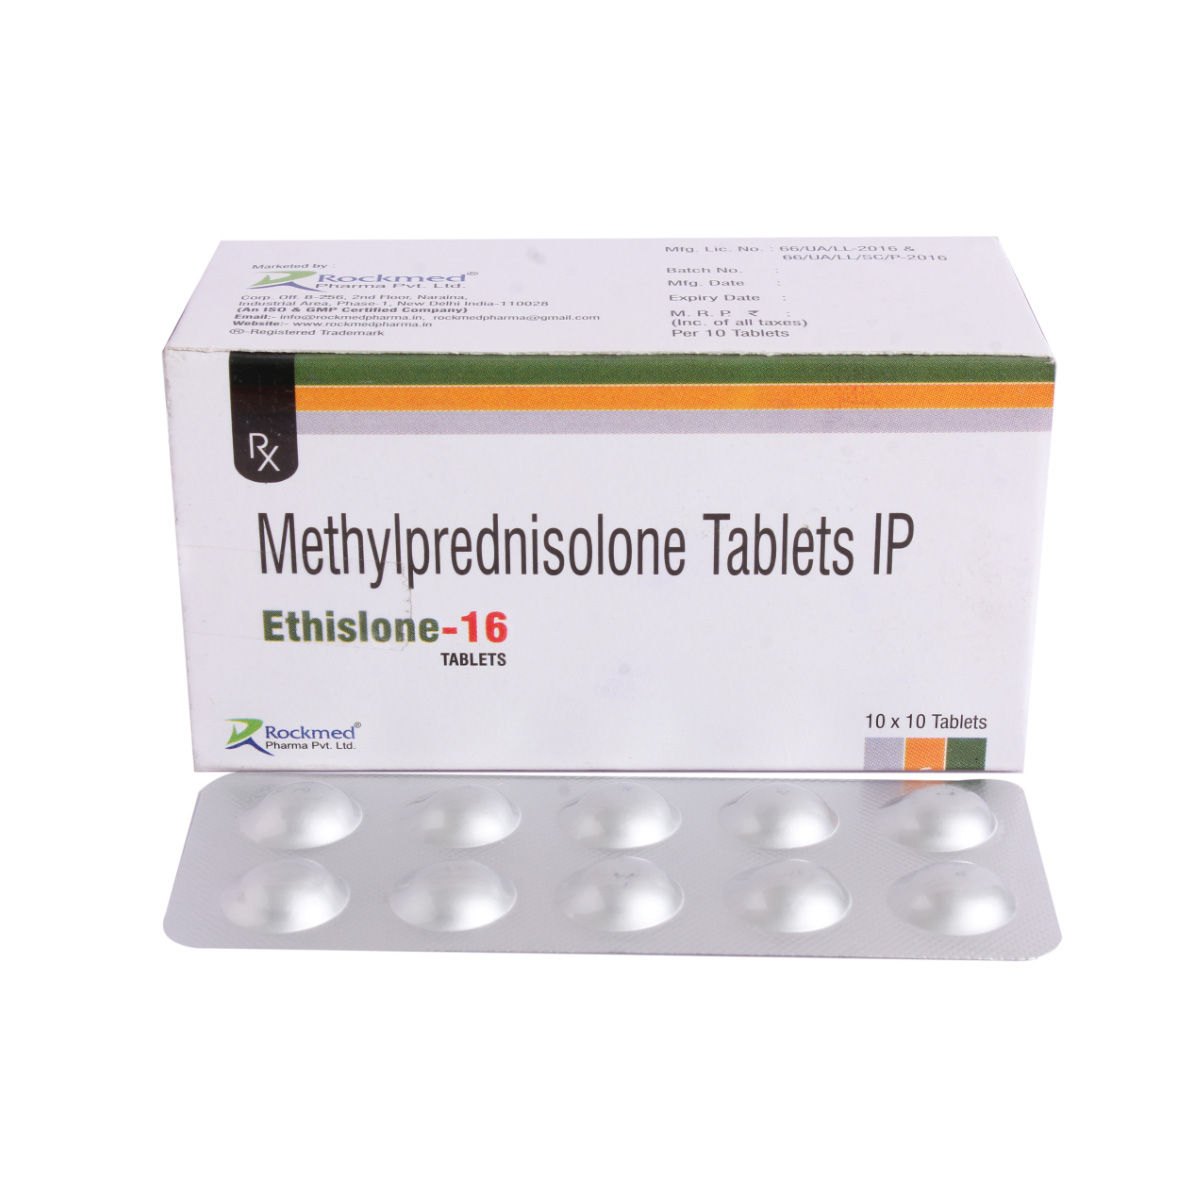 Ethislone-16 mg Tablet 10's, Pack of 10 TABLETS